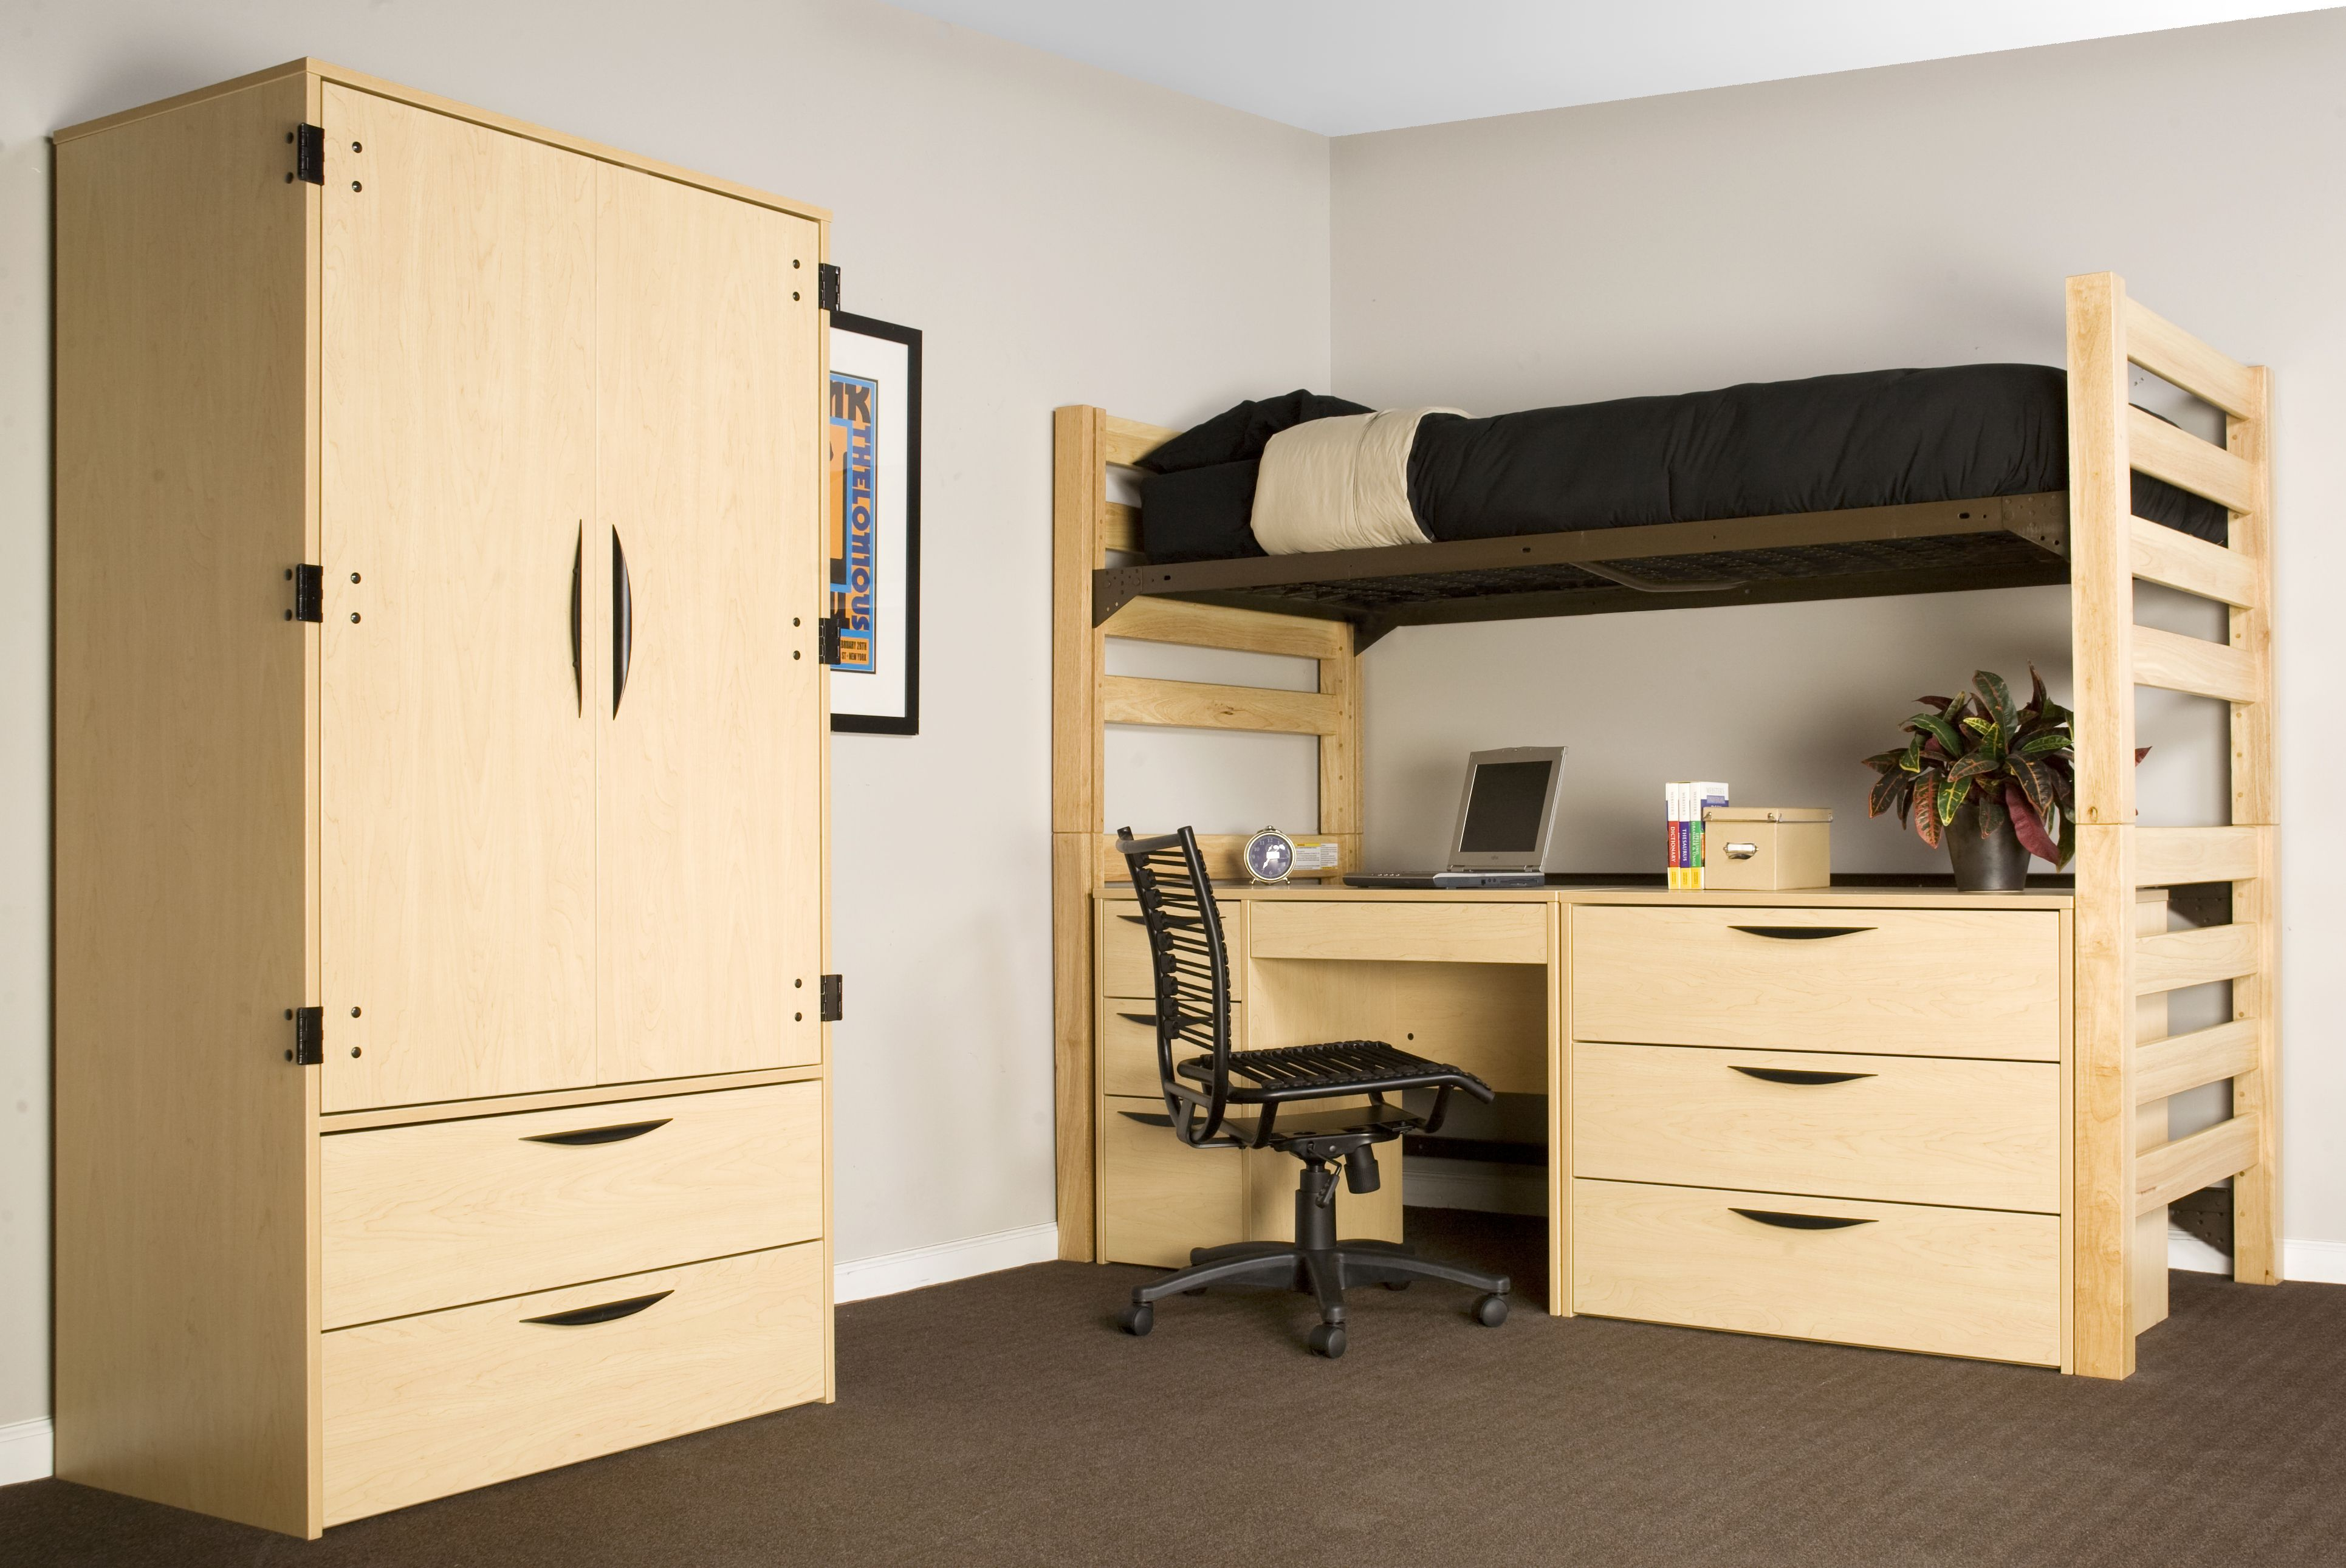 images of dormitory bedroom furniture